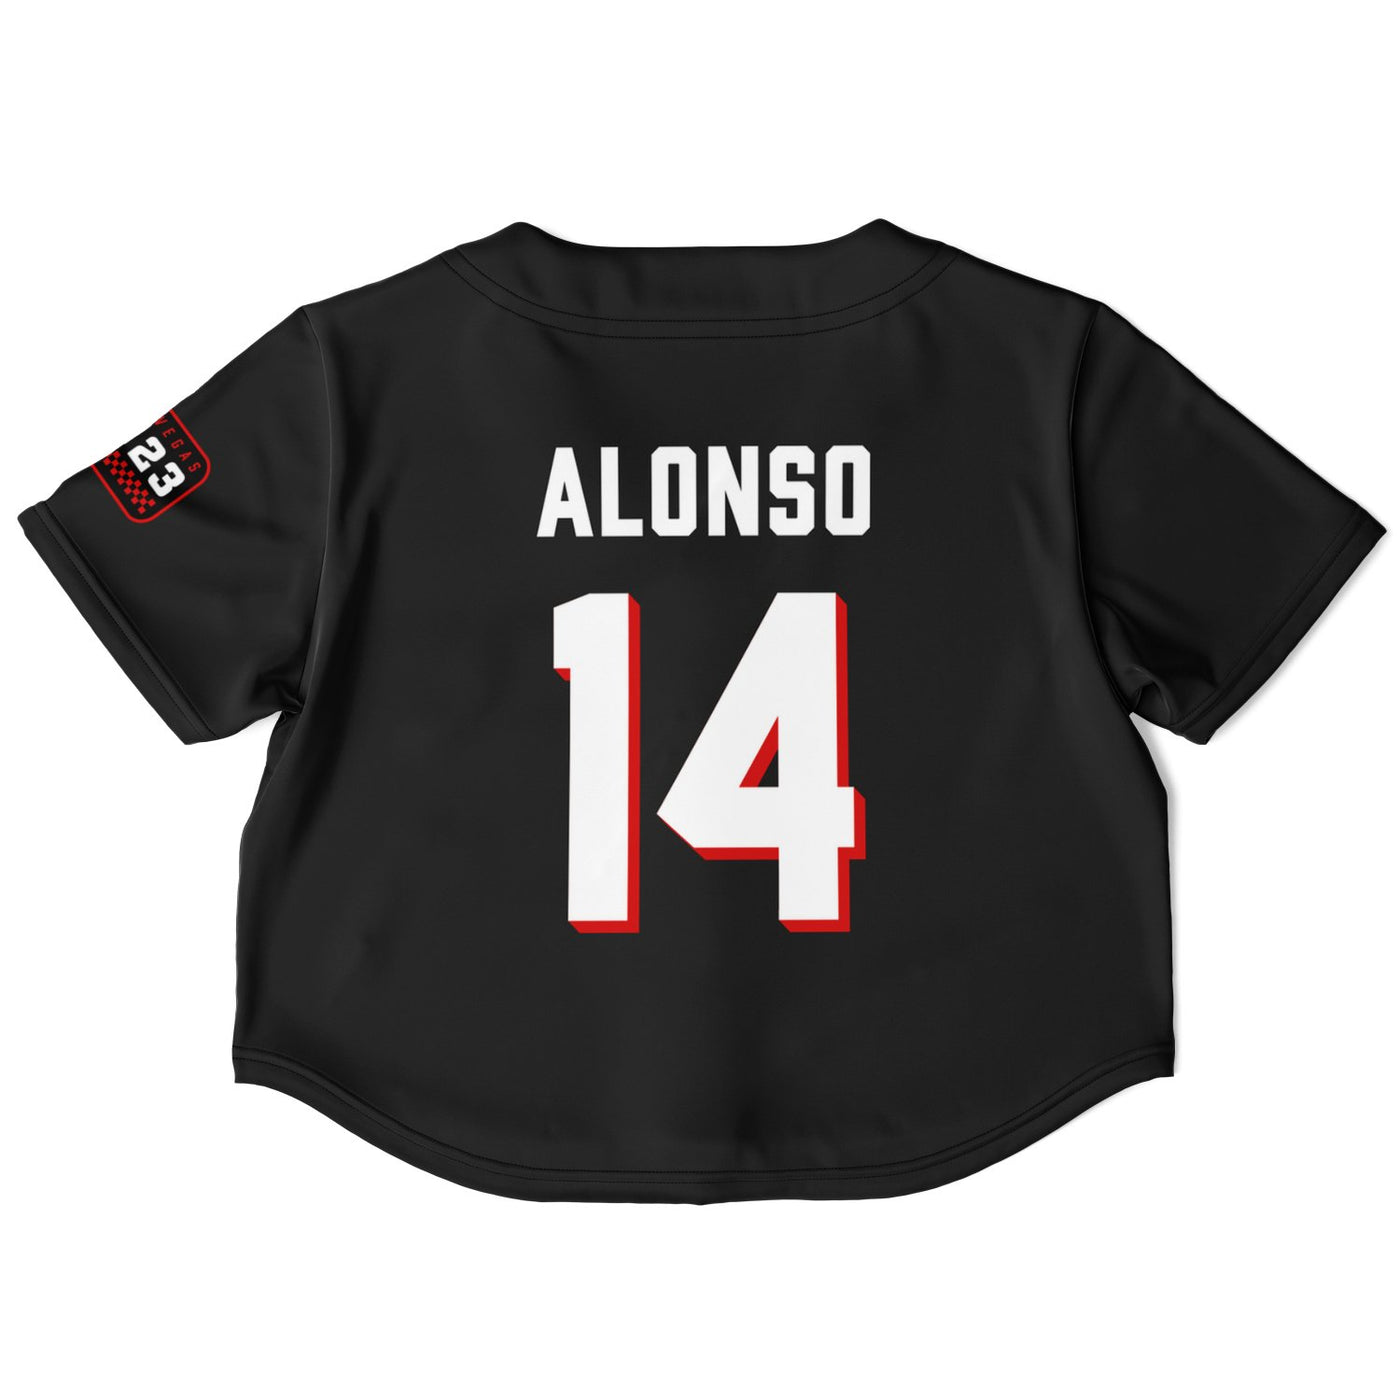 Alonso - Lucky Dice Crop Top (Clearance) - Furious Motorsport